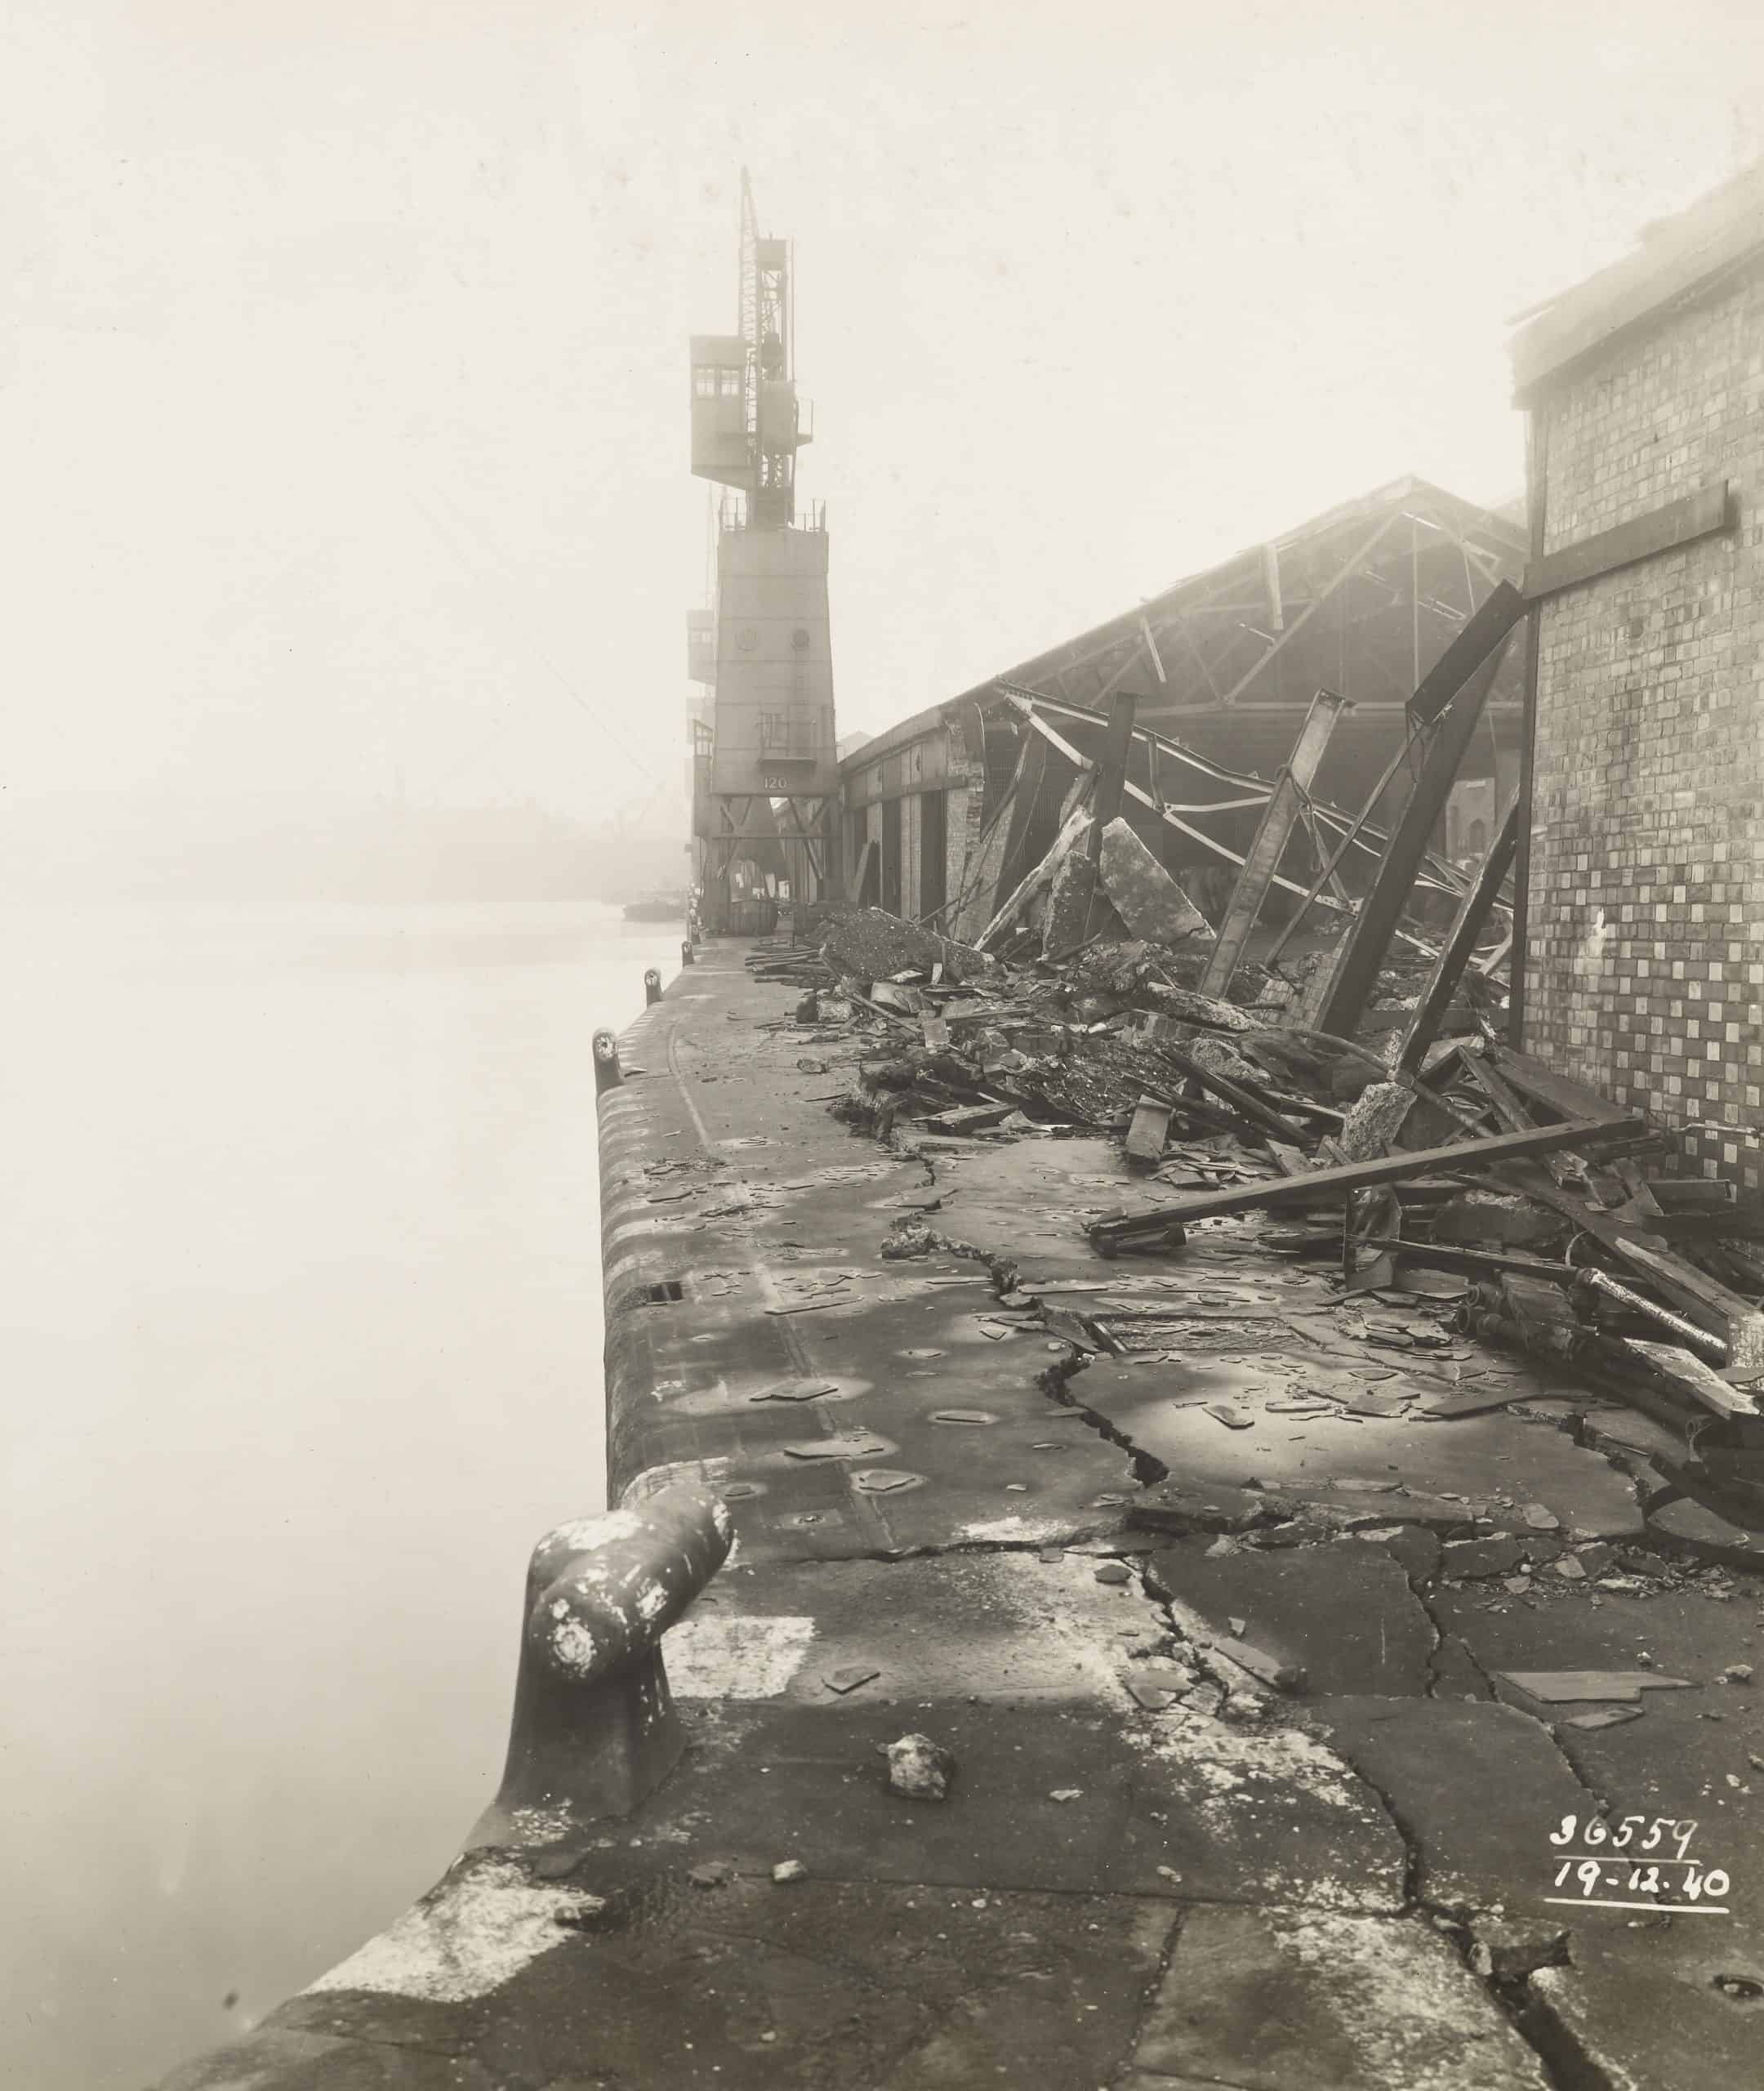 Bomb damage to London Dock. West End of Denmark Shed showing bulged quaywall of South Side of Western Dock.
Date: 19/12/1940
PLA Photo Number 36559